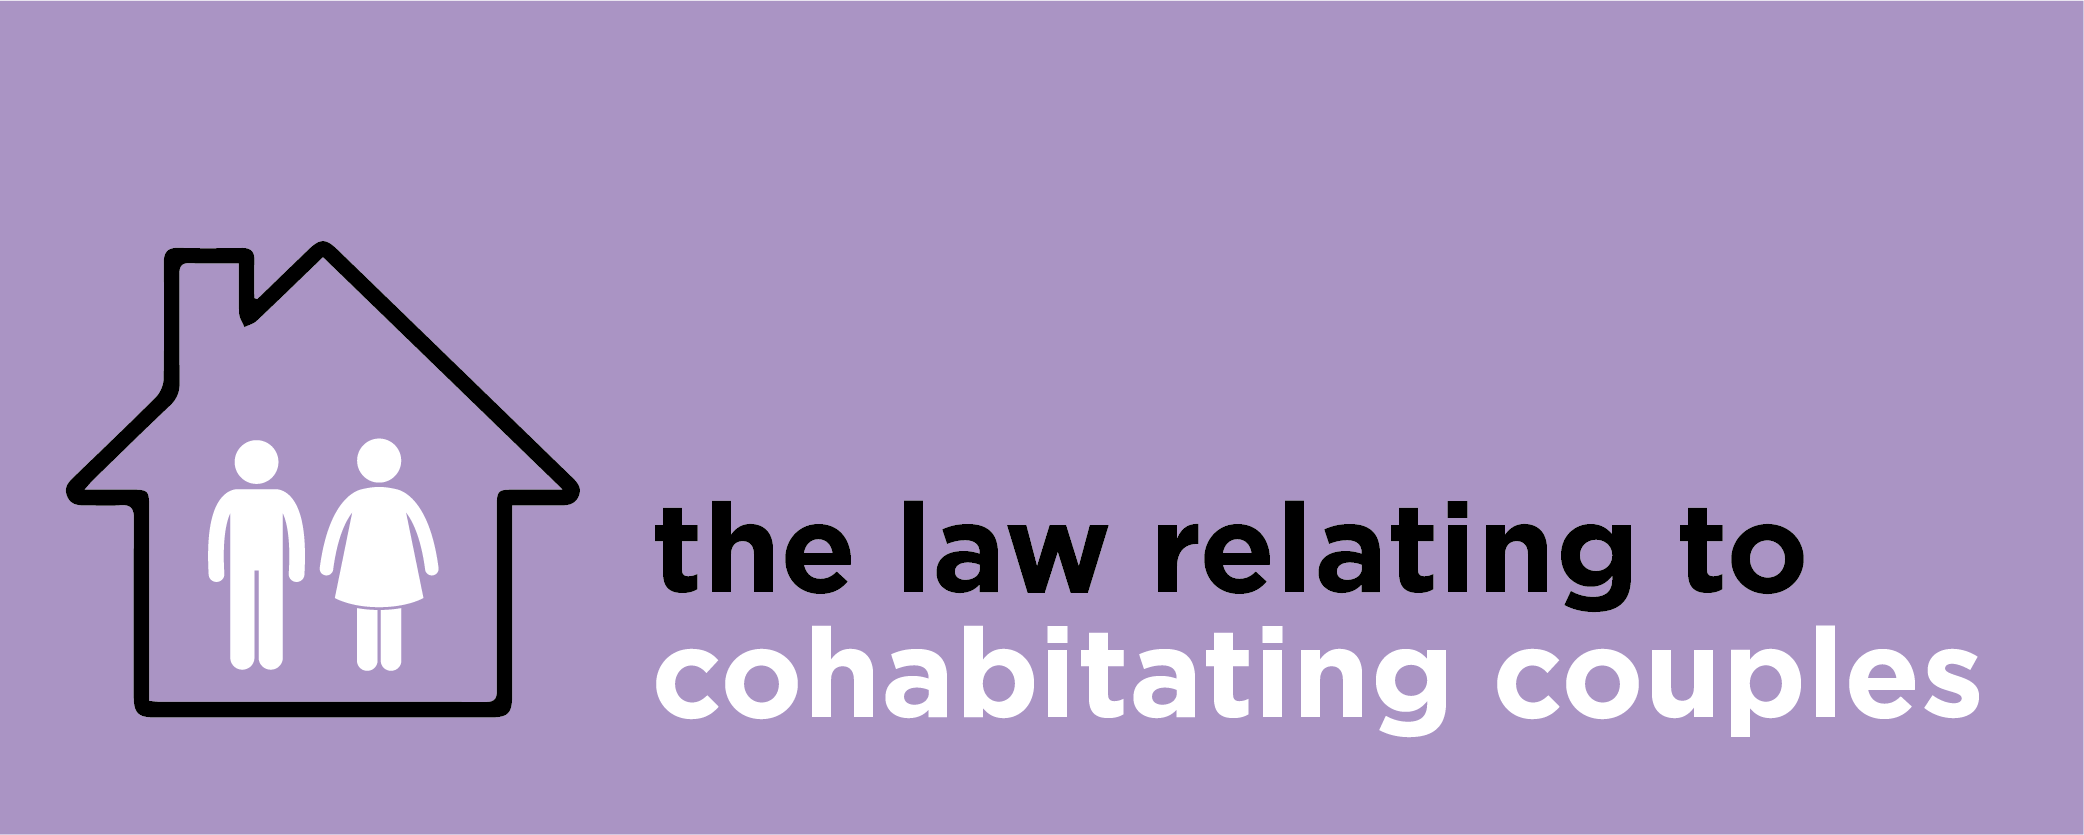 The law relating to cohabiting couples